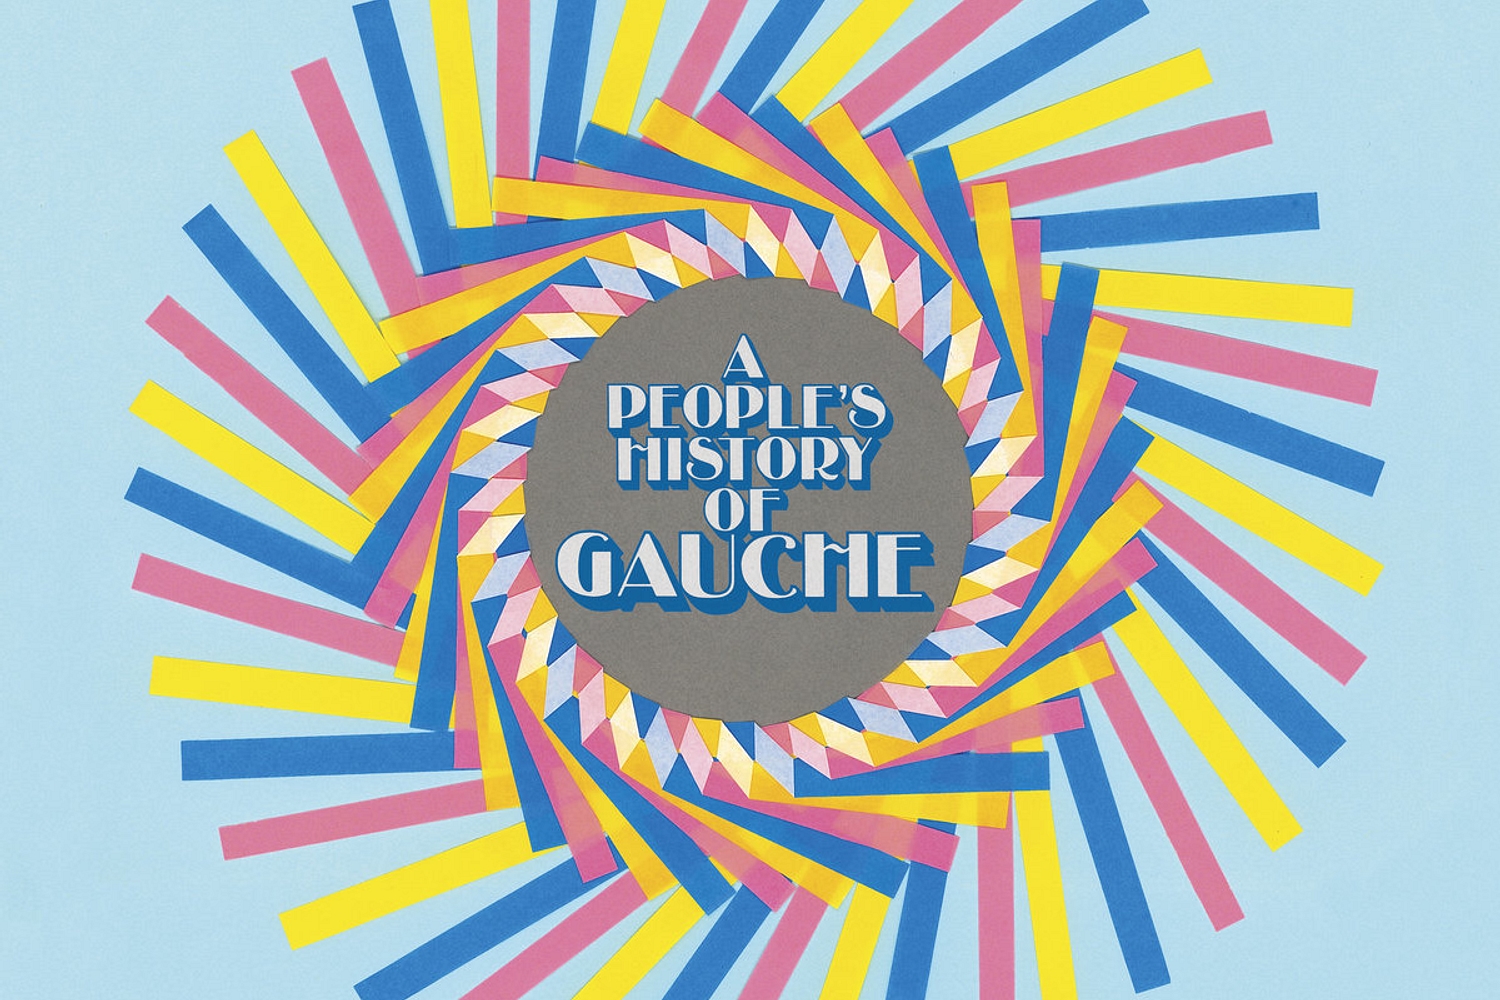 Gauche - A People’s History Of Gauche